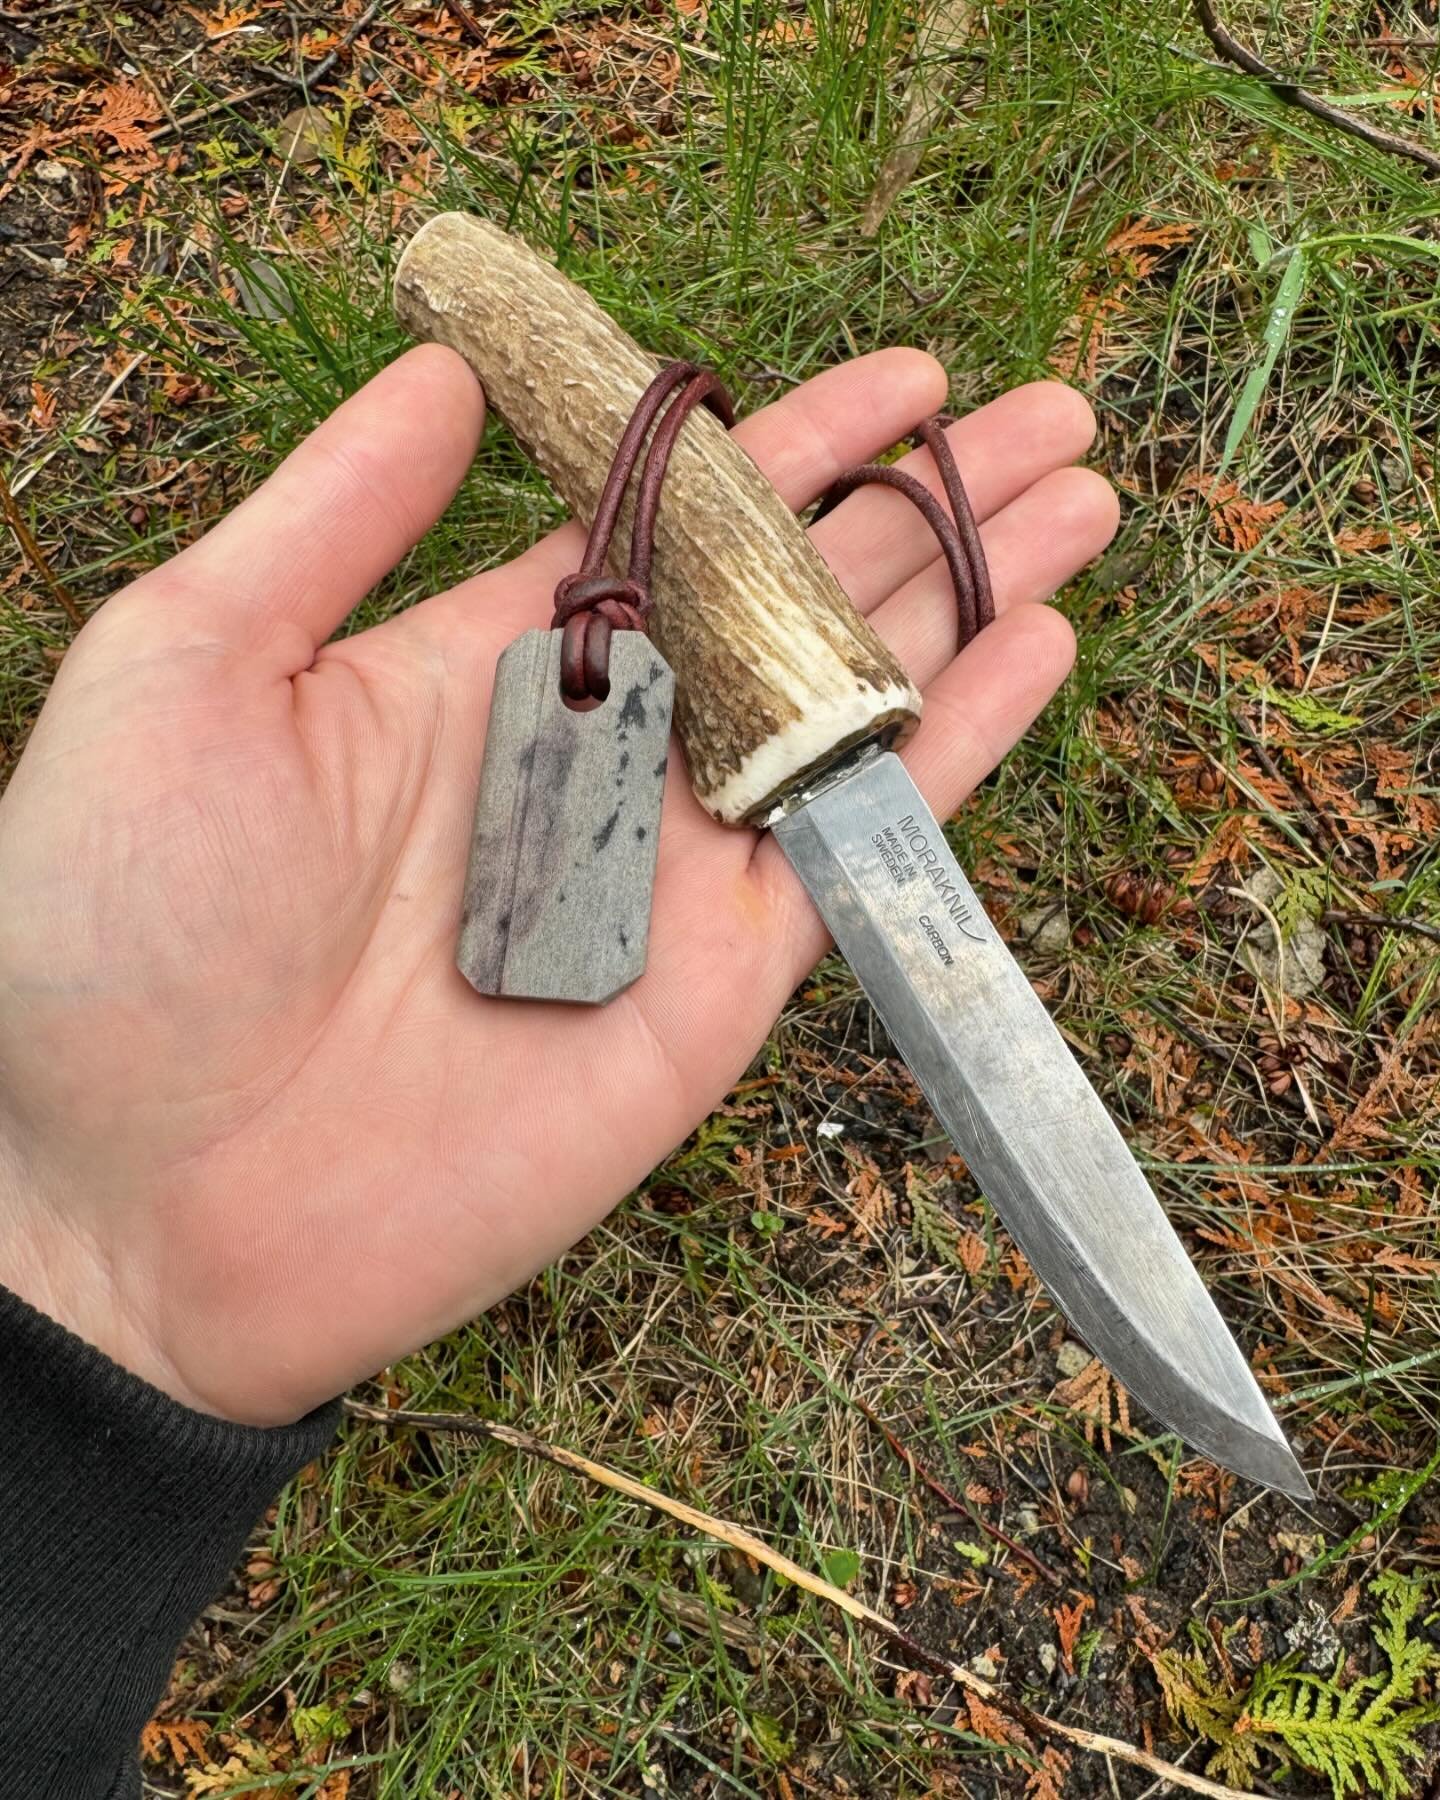 This little Viking Whetstone Pendant from @wazoogearco is one of my most favorite items that I carry with me always. The ability to sharpen my knife in the field when its getting dull is a game changer. And its so small and looks great as a necklace 